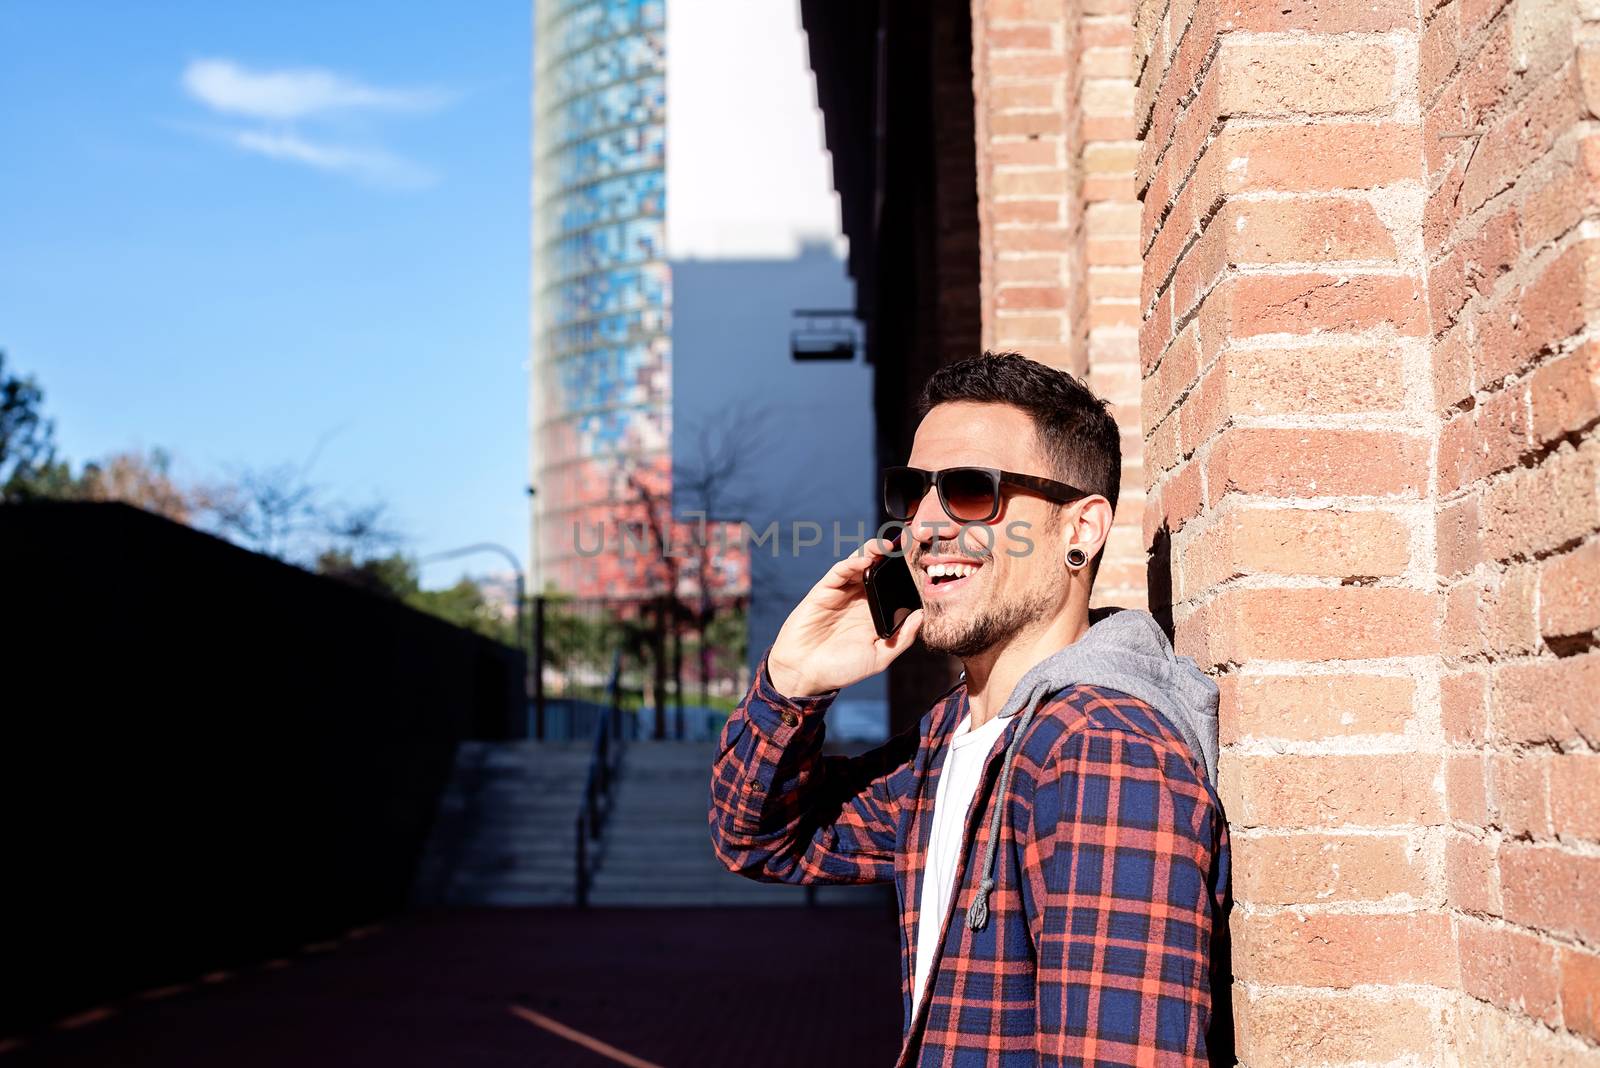 Young bearded male leaning on a bricked wall wearing sunglasses while using a smartphone outside.